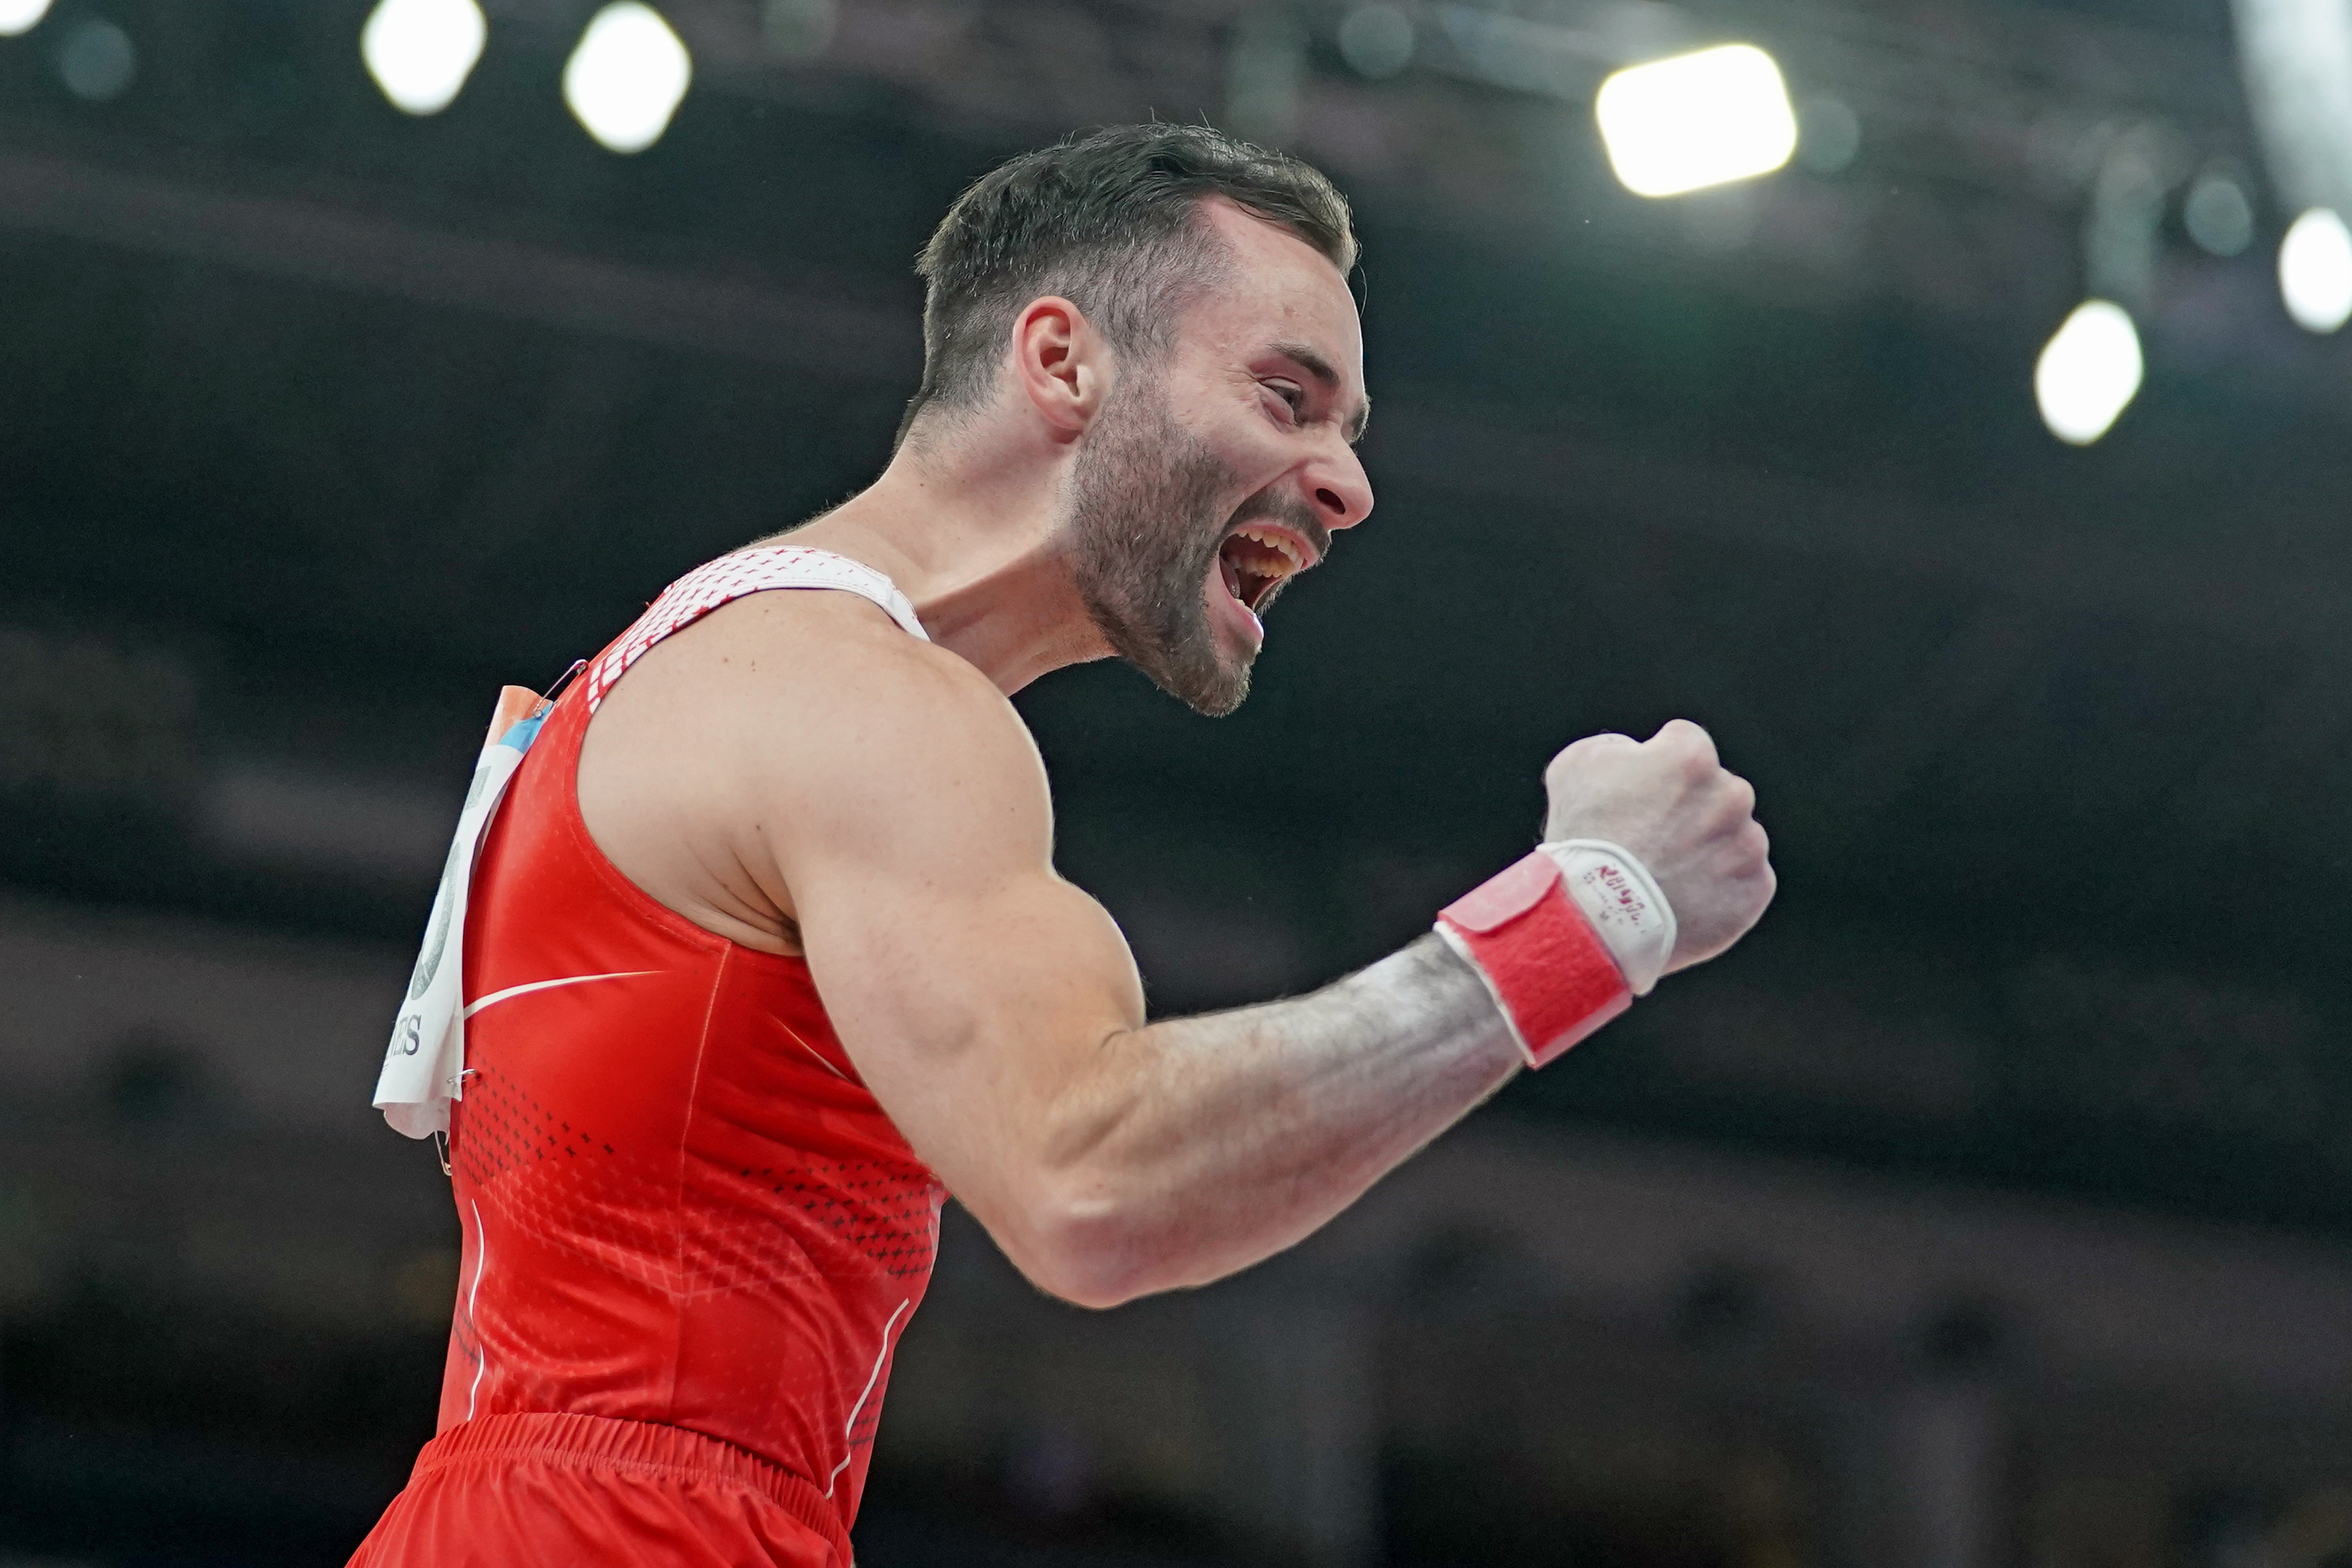 England’s James Hall is looking for gold on Sunday at the Commonwealth Games. (Zac Goodwin/PA)